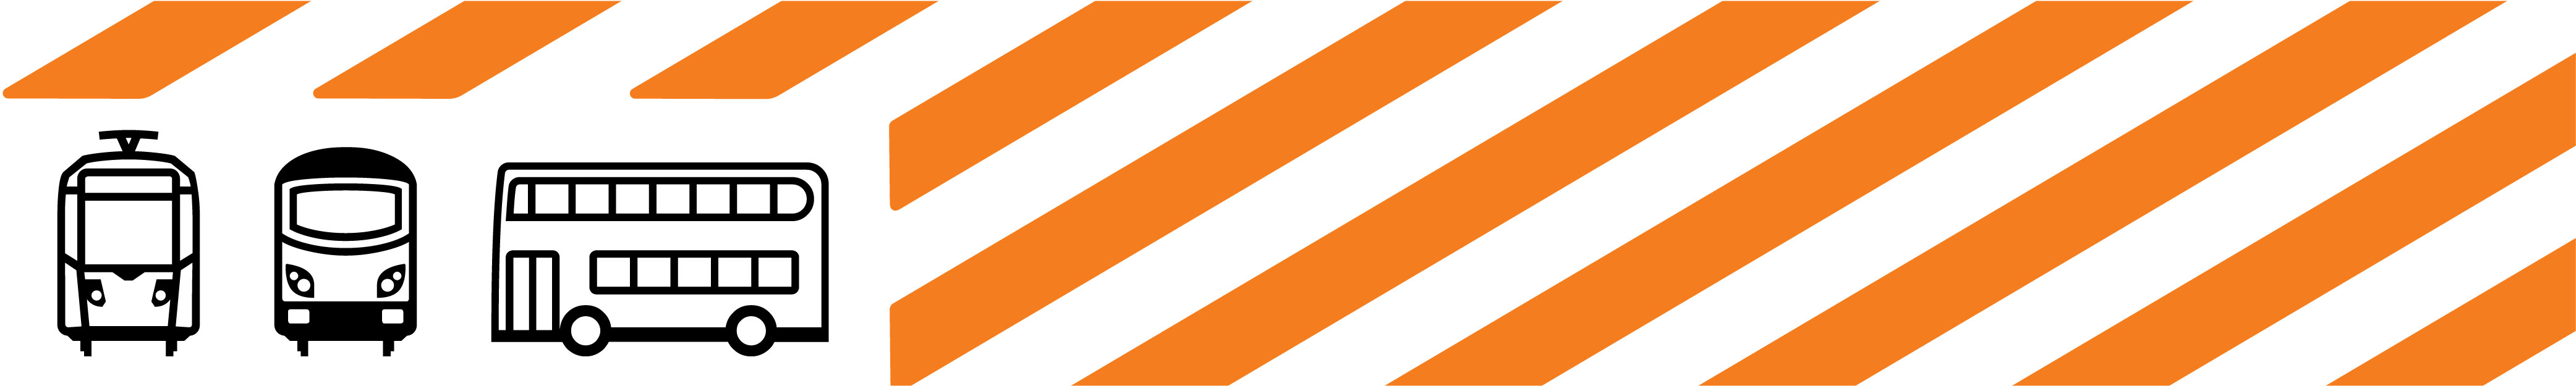 Orange header with bus, tram and train logo to show improving journeys